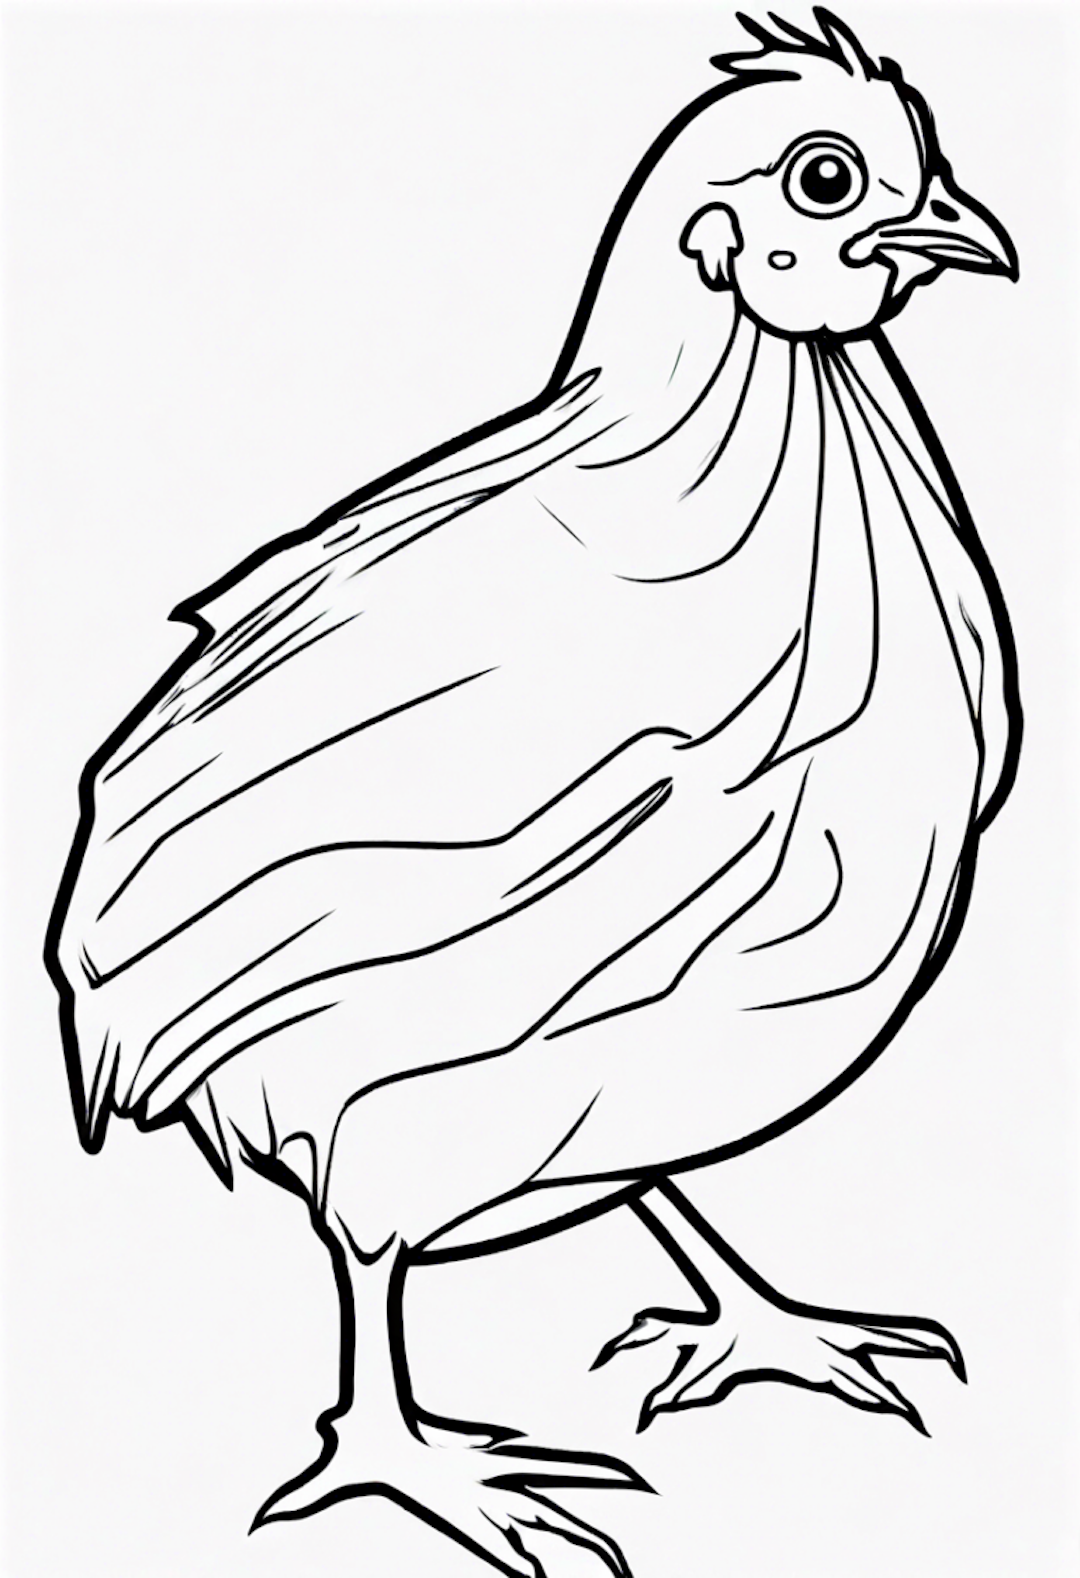 Chick coloring pages